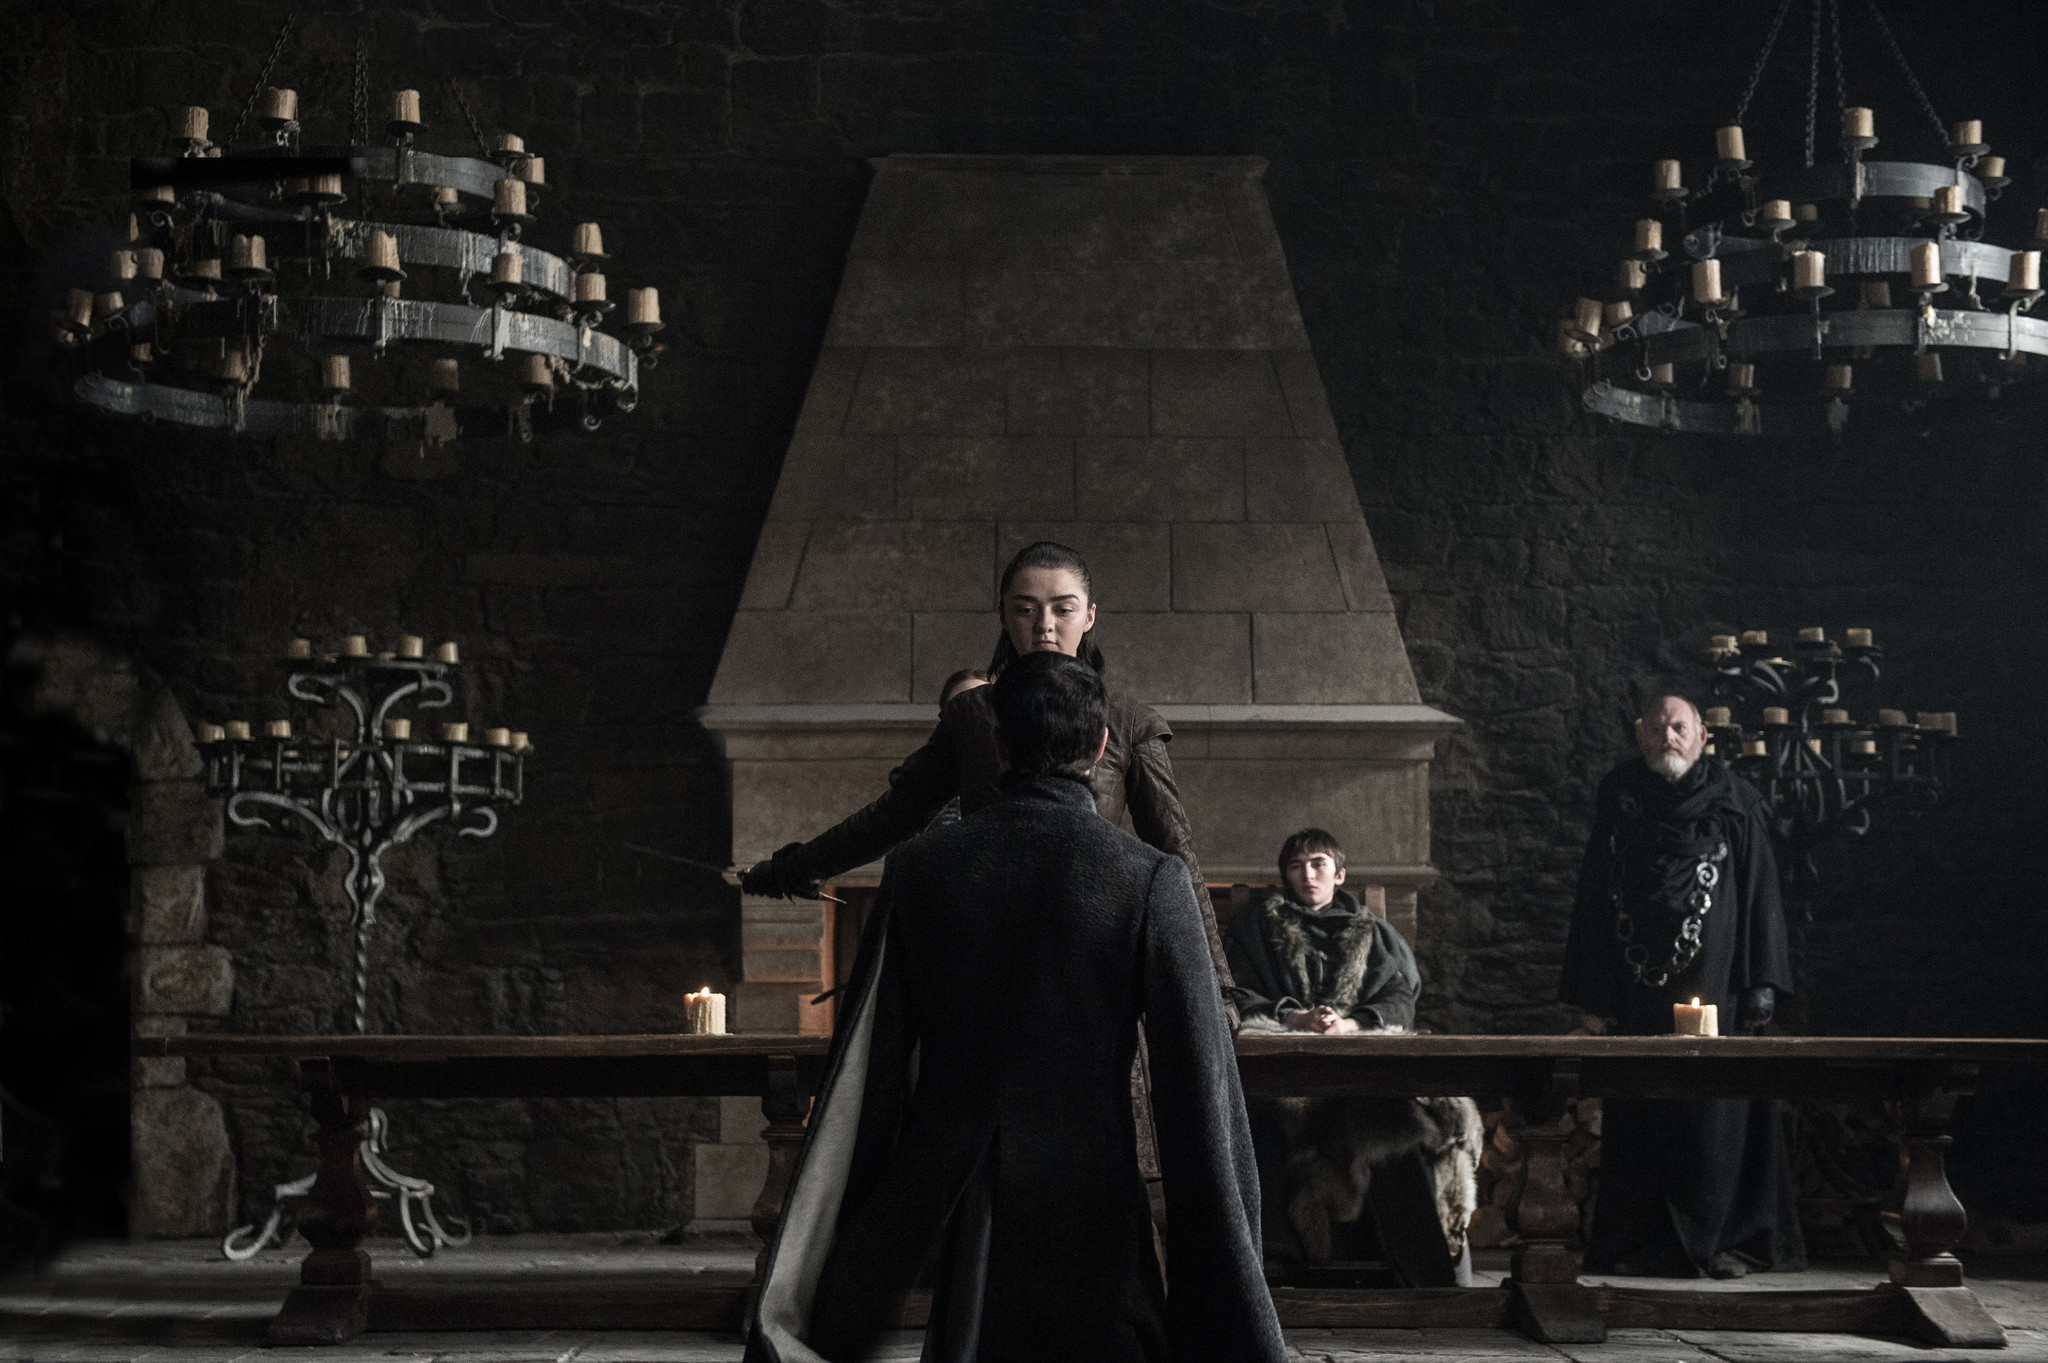 Maisie Williams as Arya Stark, Aidan Gillen as Petyr “Littlefinger” Baelish and Isaac Hempstead Wright as Bran Stark in the "Game of Thrones" episode “The Dragon and the Wolf.”